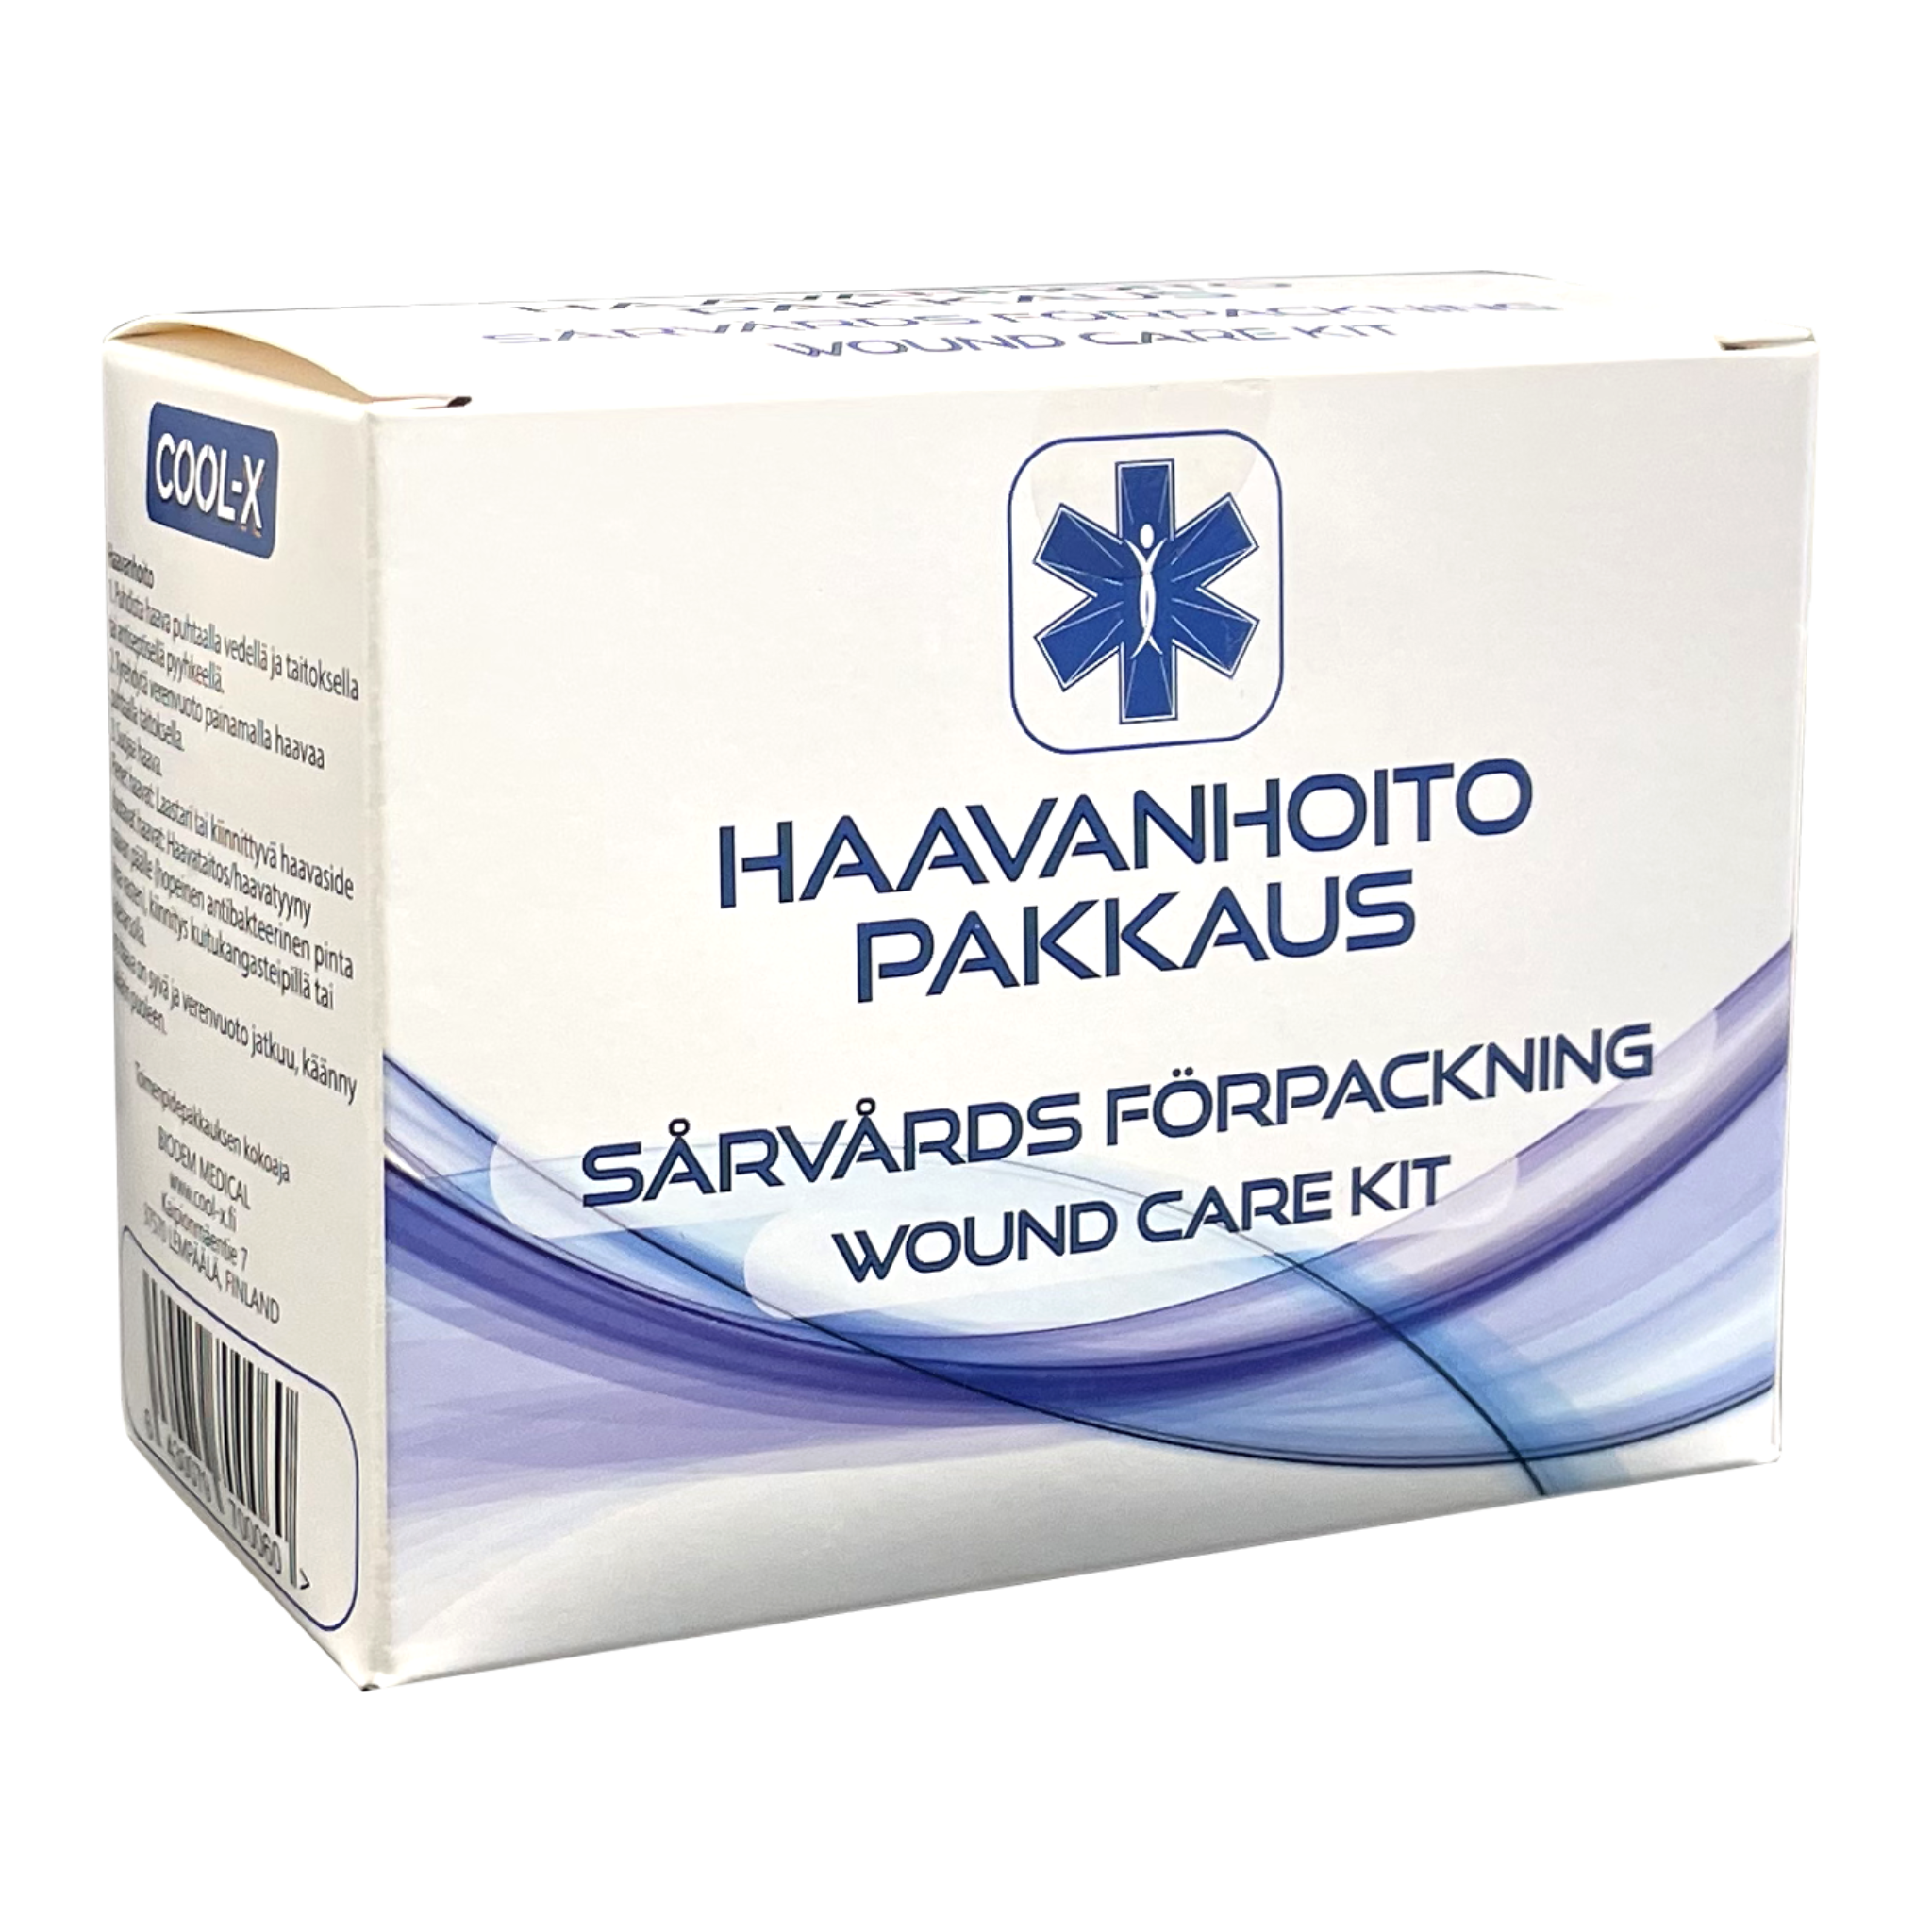 Wound care kit